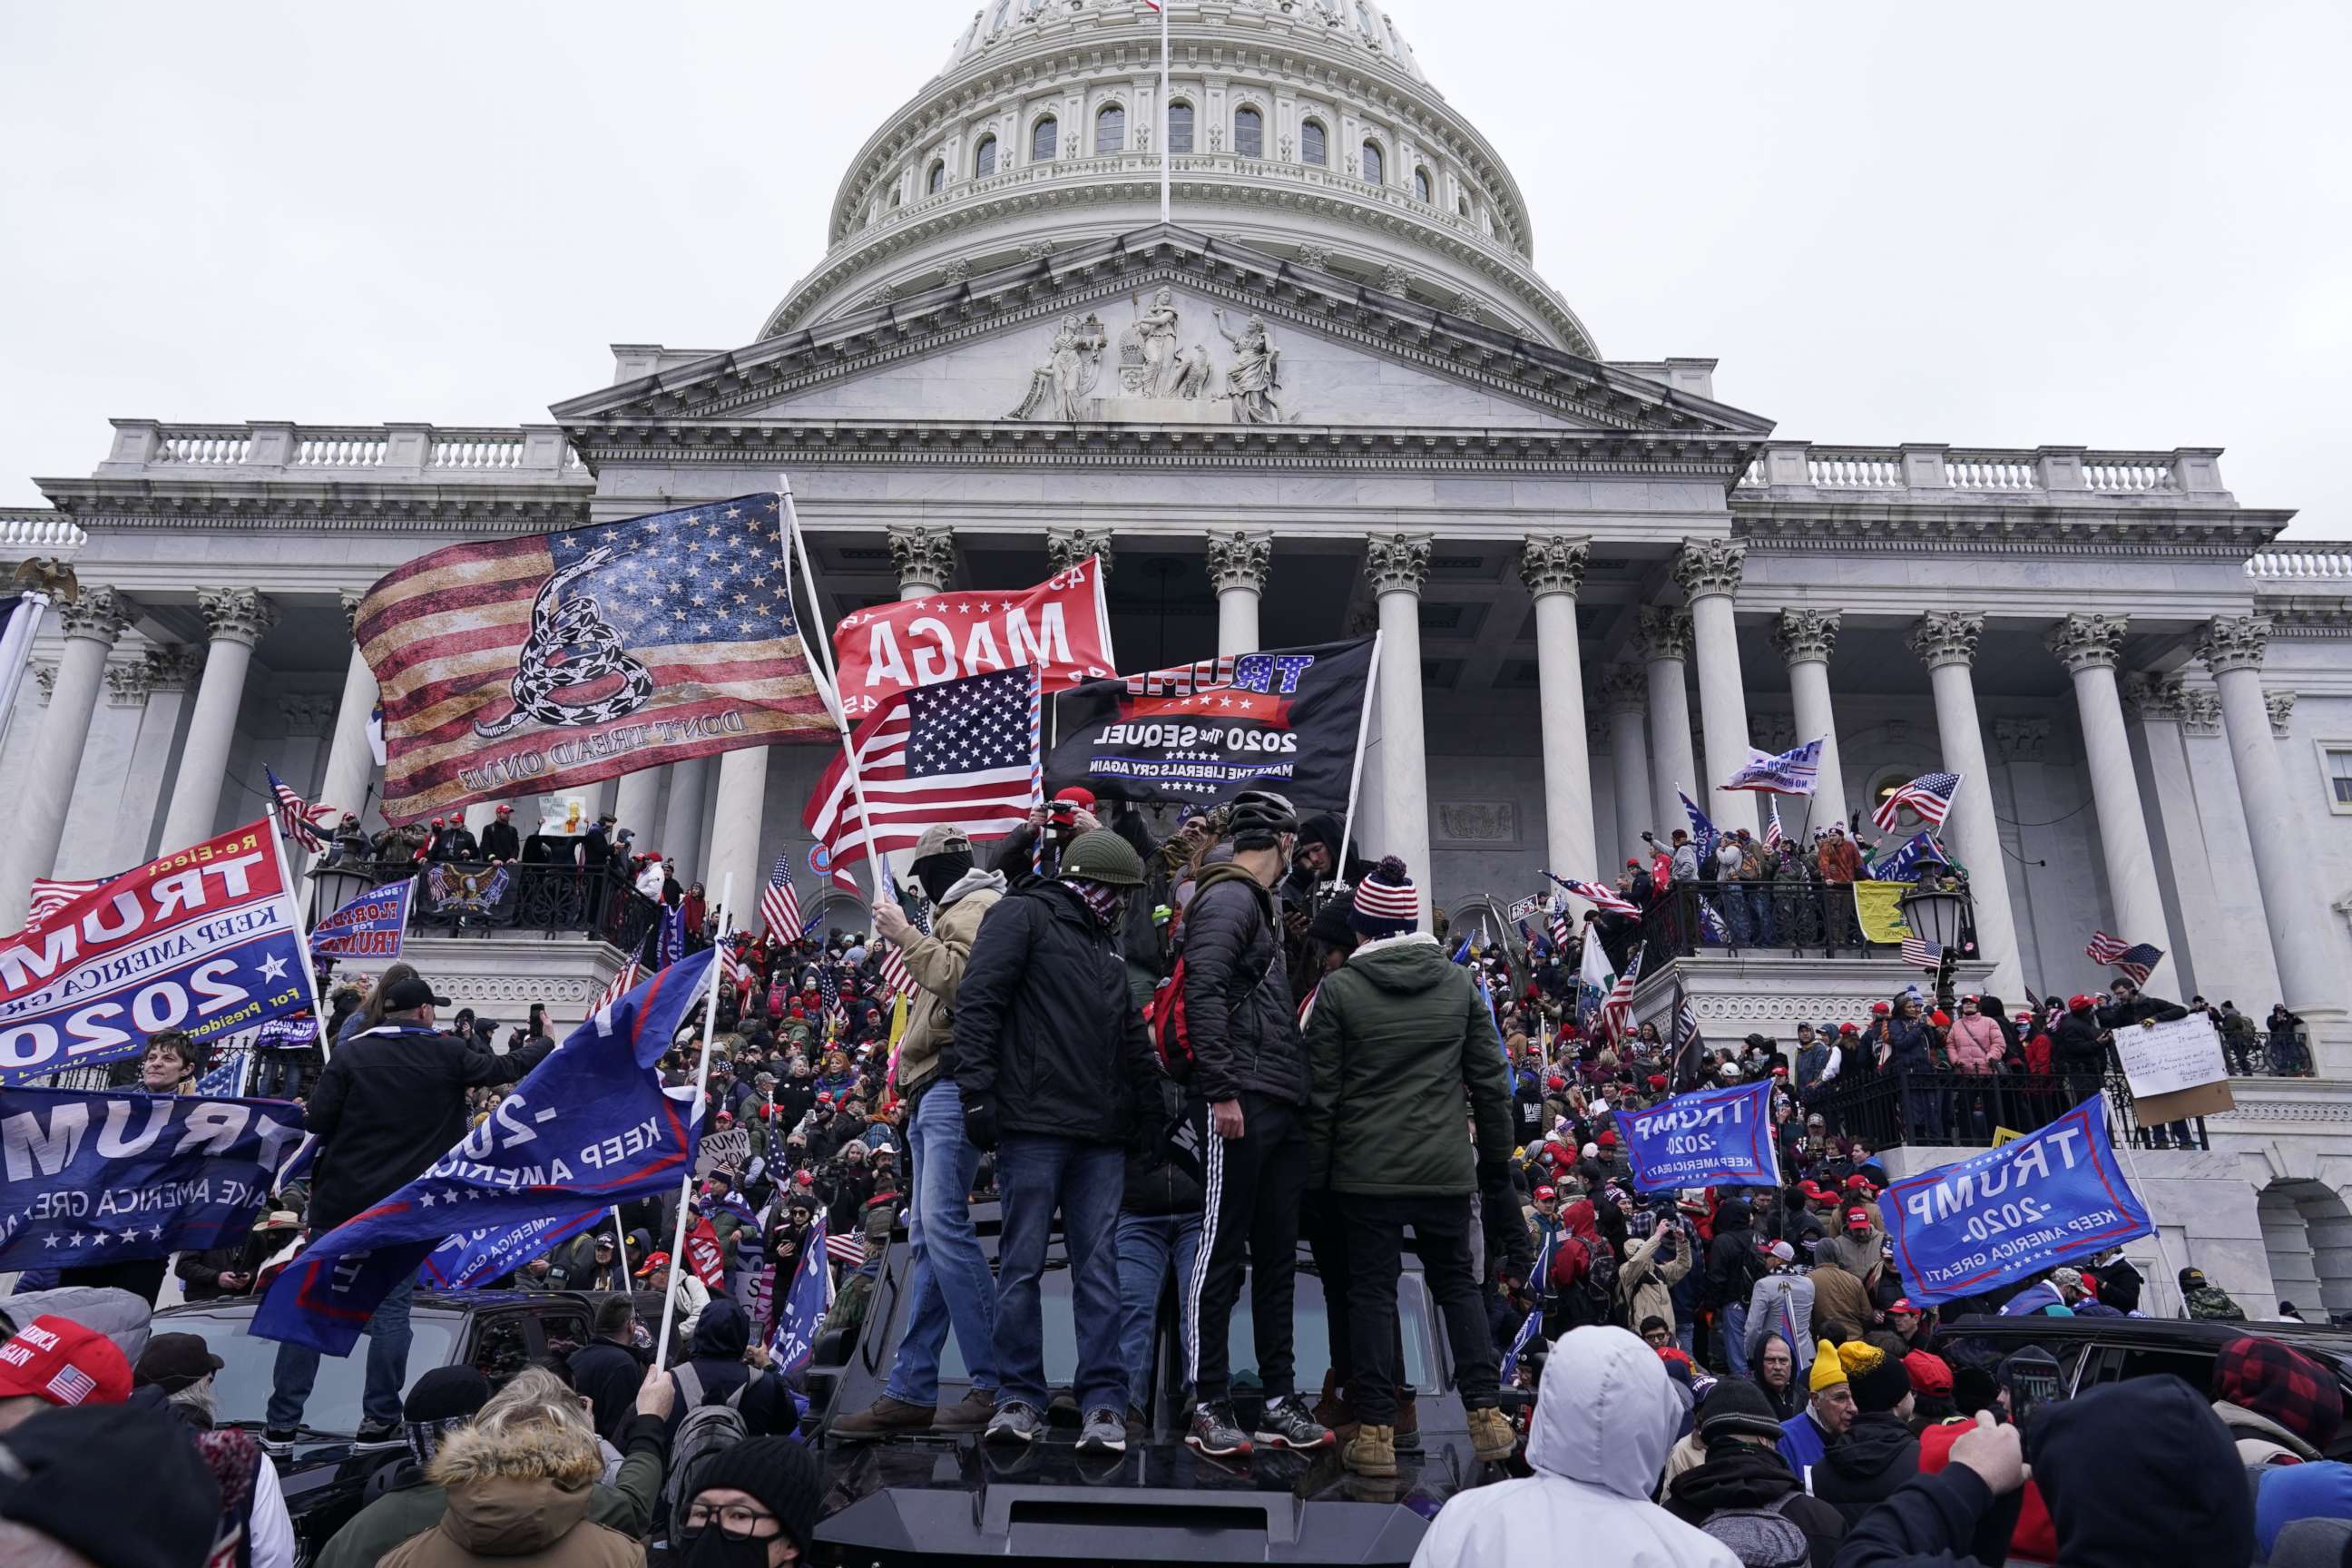 PHOTO: Supporters of President Trump storm the U.S. Capitol in Washington on Jan. 6, 2021.